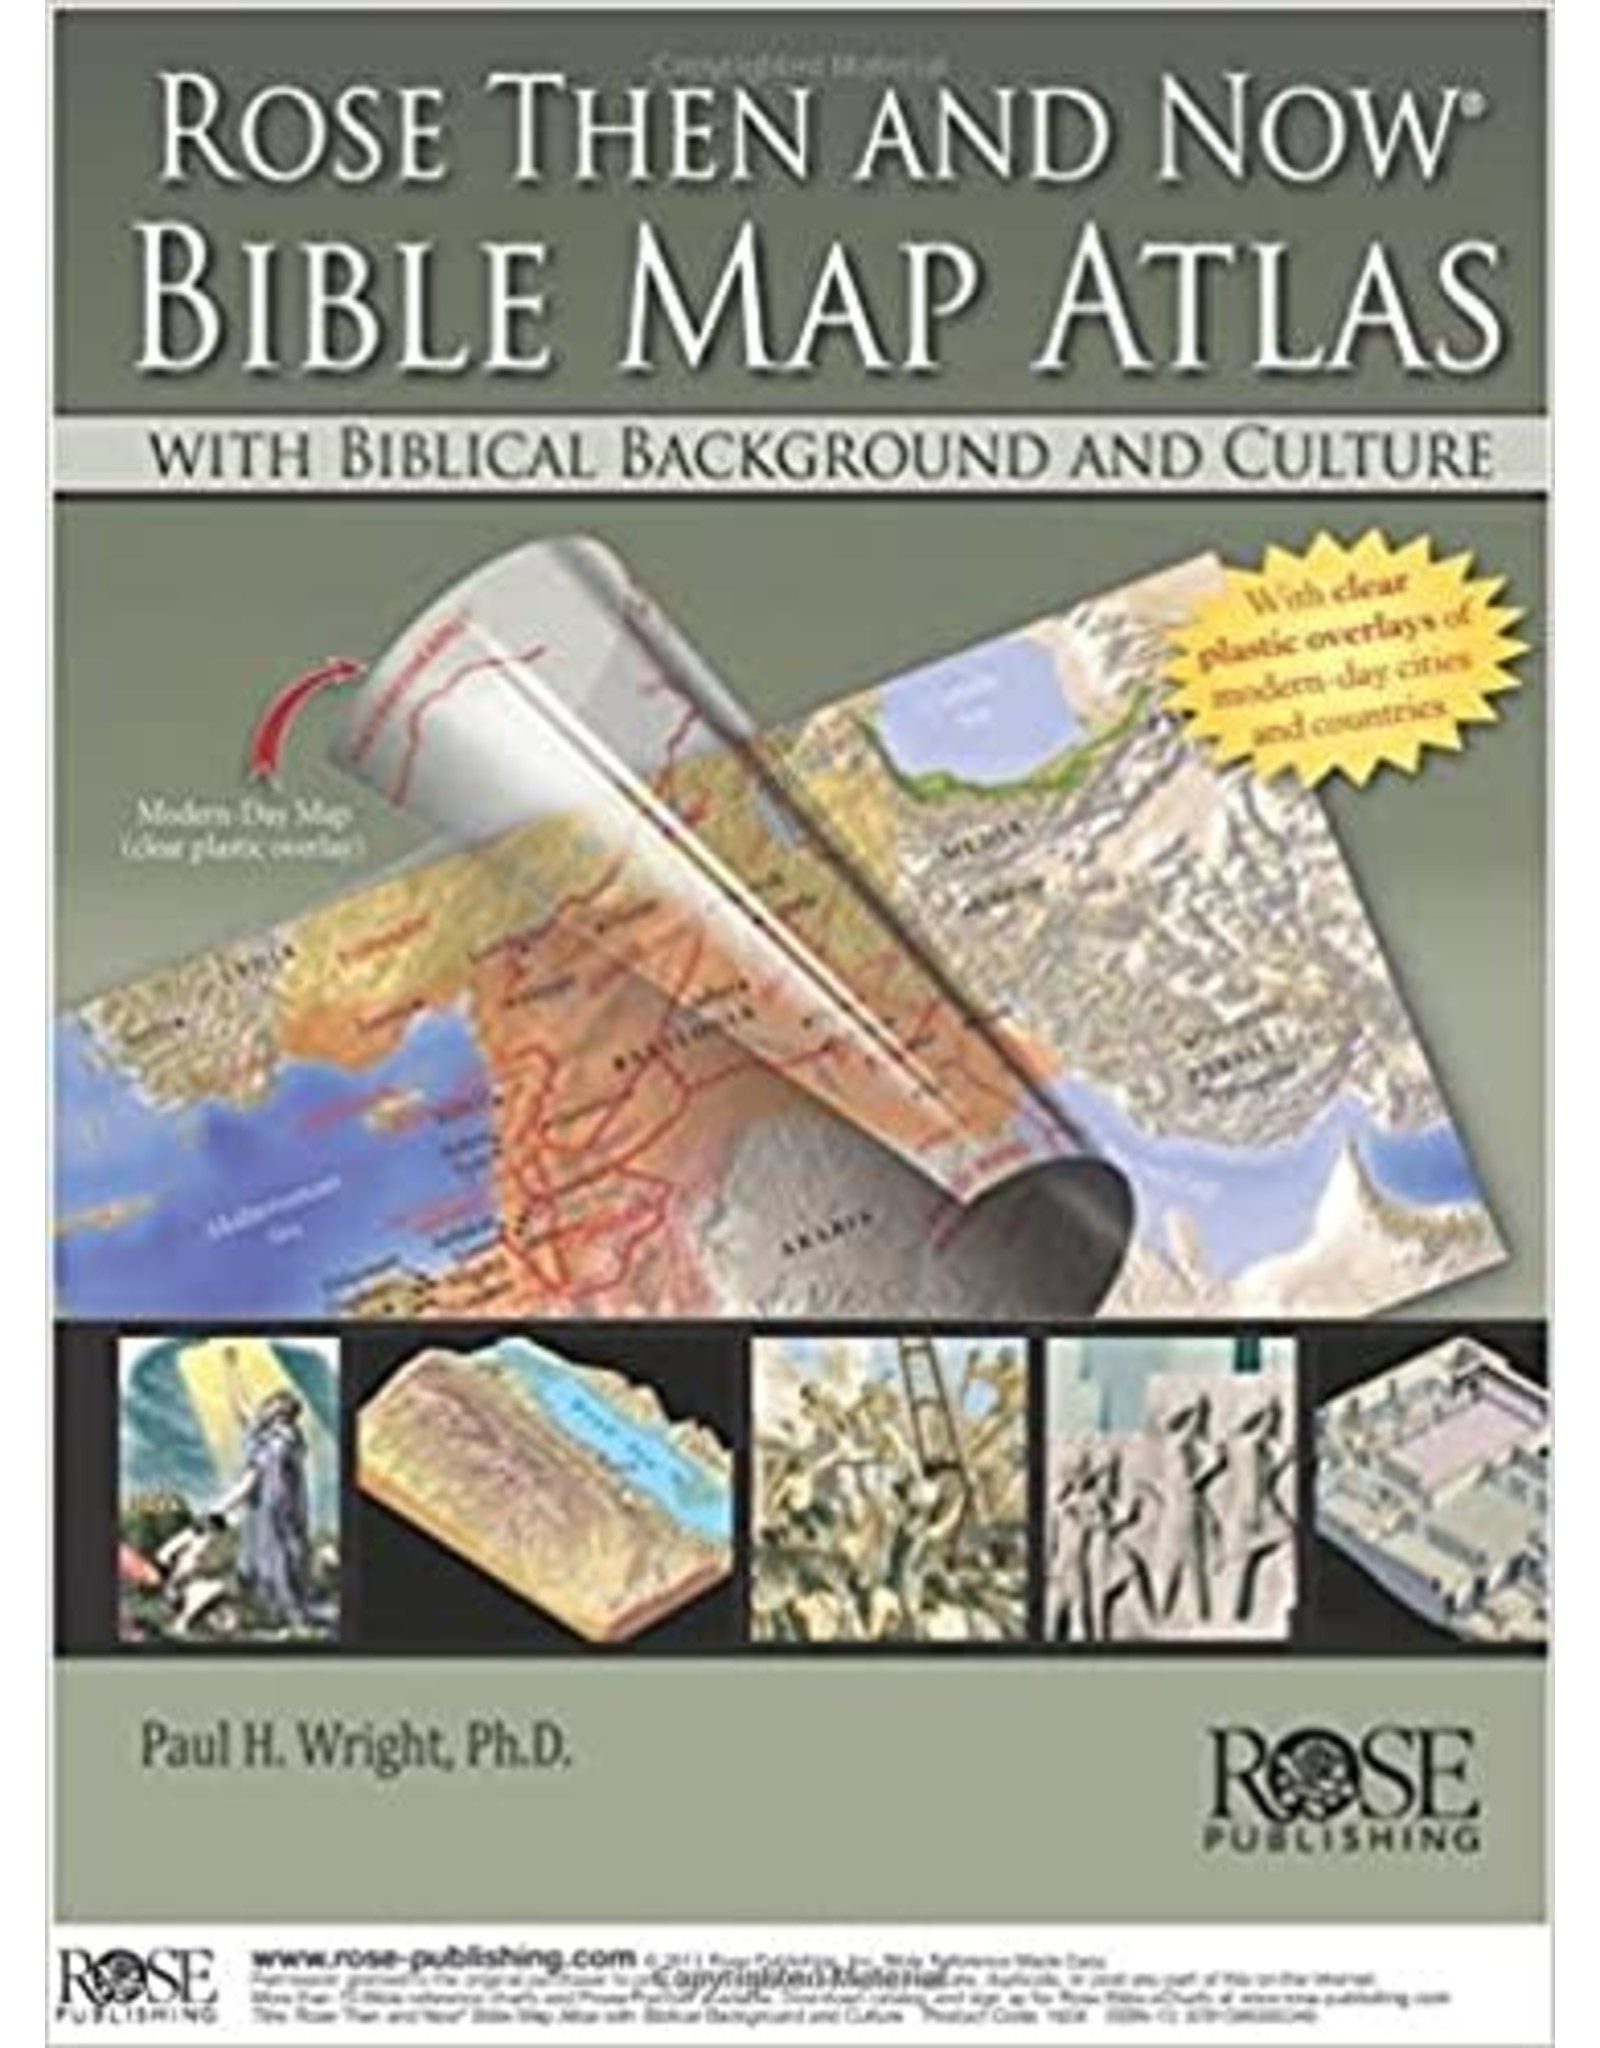 Rose Publishing Roses Then And Now Bible Map Atlas